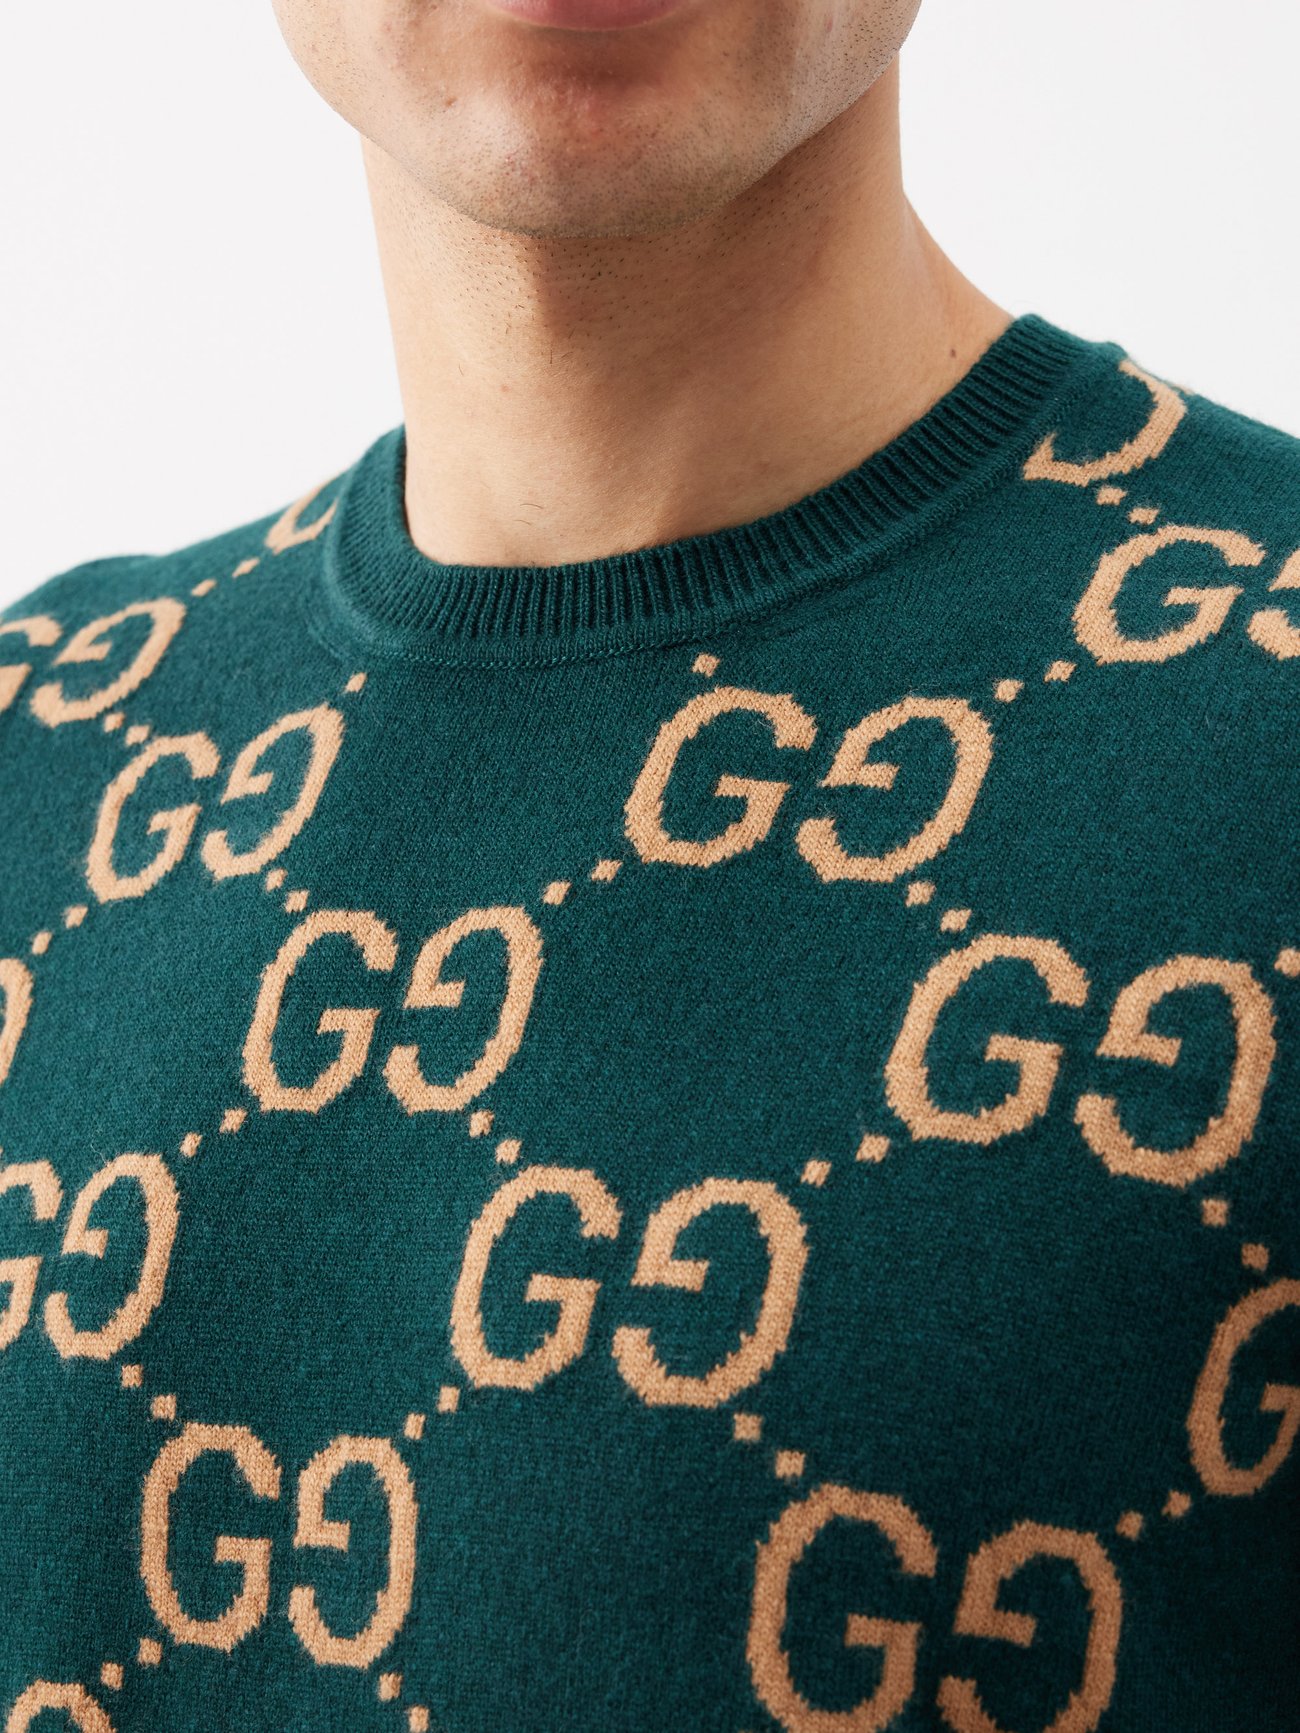 Gucci Wool GG Jacquard Sweater in Green for Men